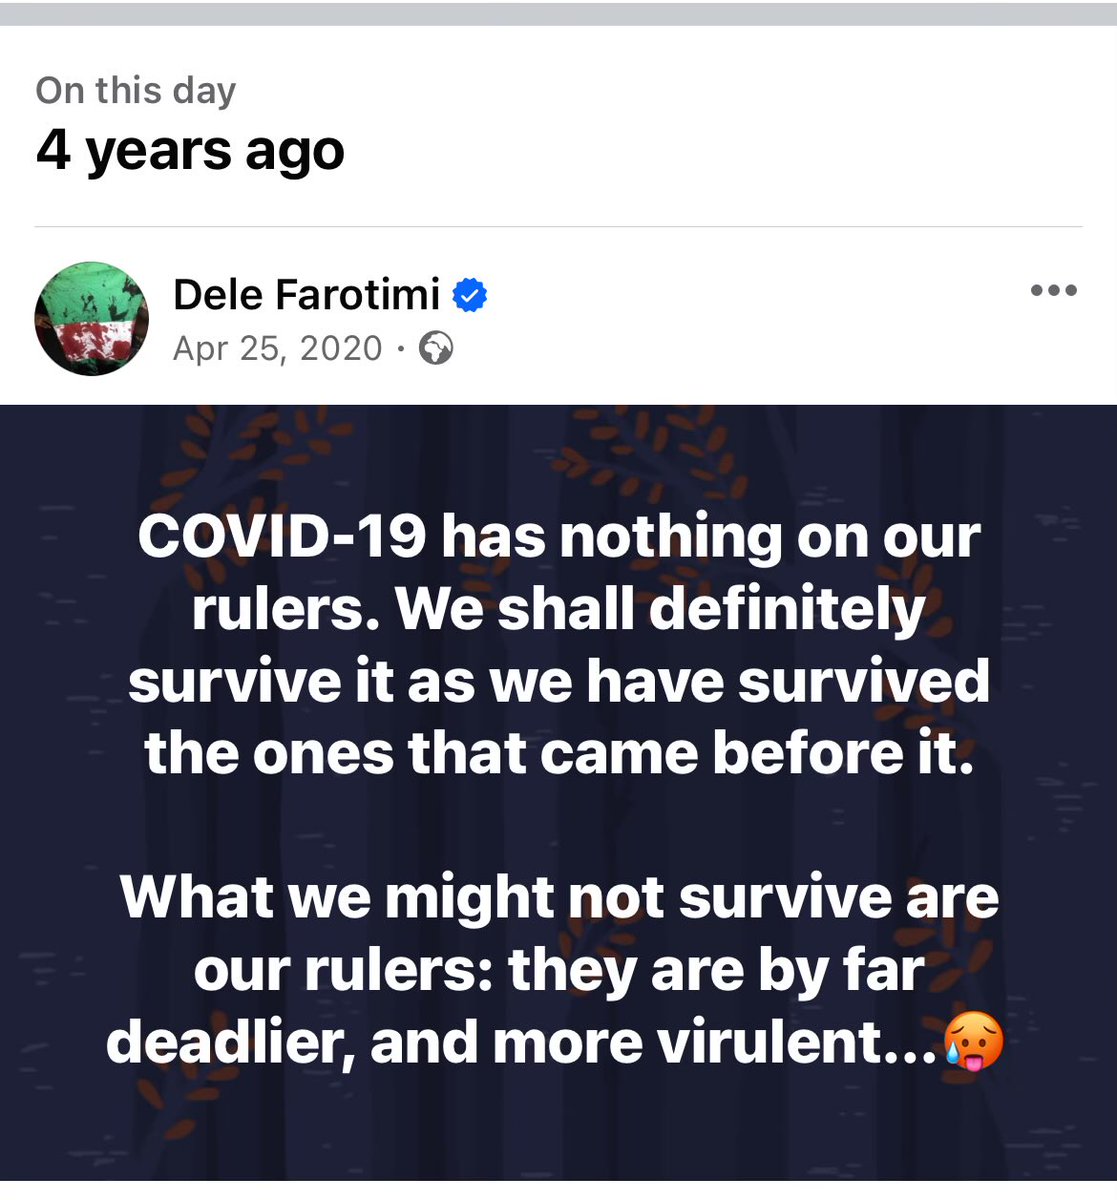 COVID-19 has nothing on our rulers. We shall definitely survive it as we have survived the ones that came before it. What we might not survive are our rulers: they are by far deadlier, and more virulent...🥵